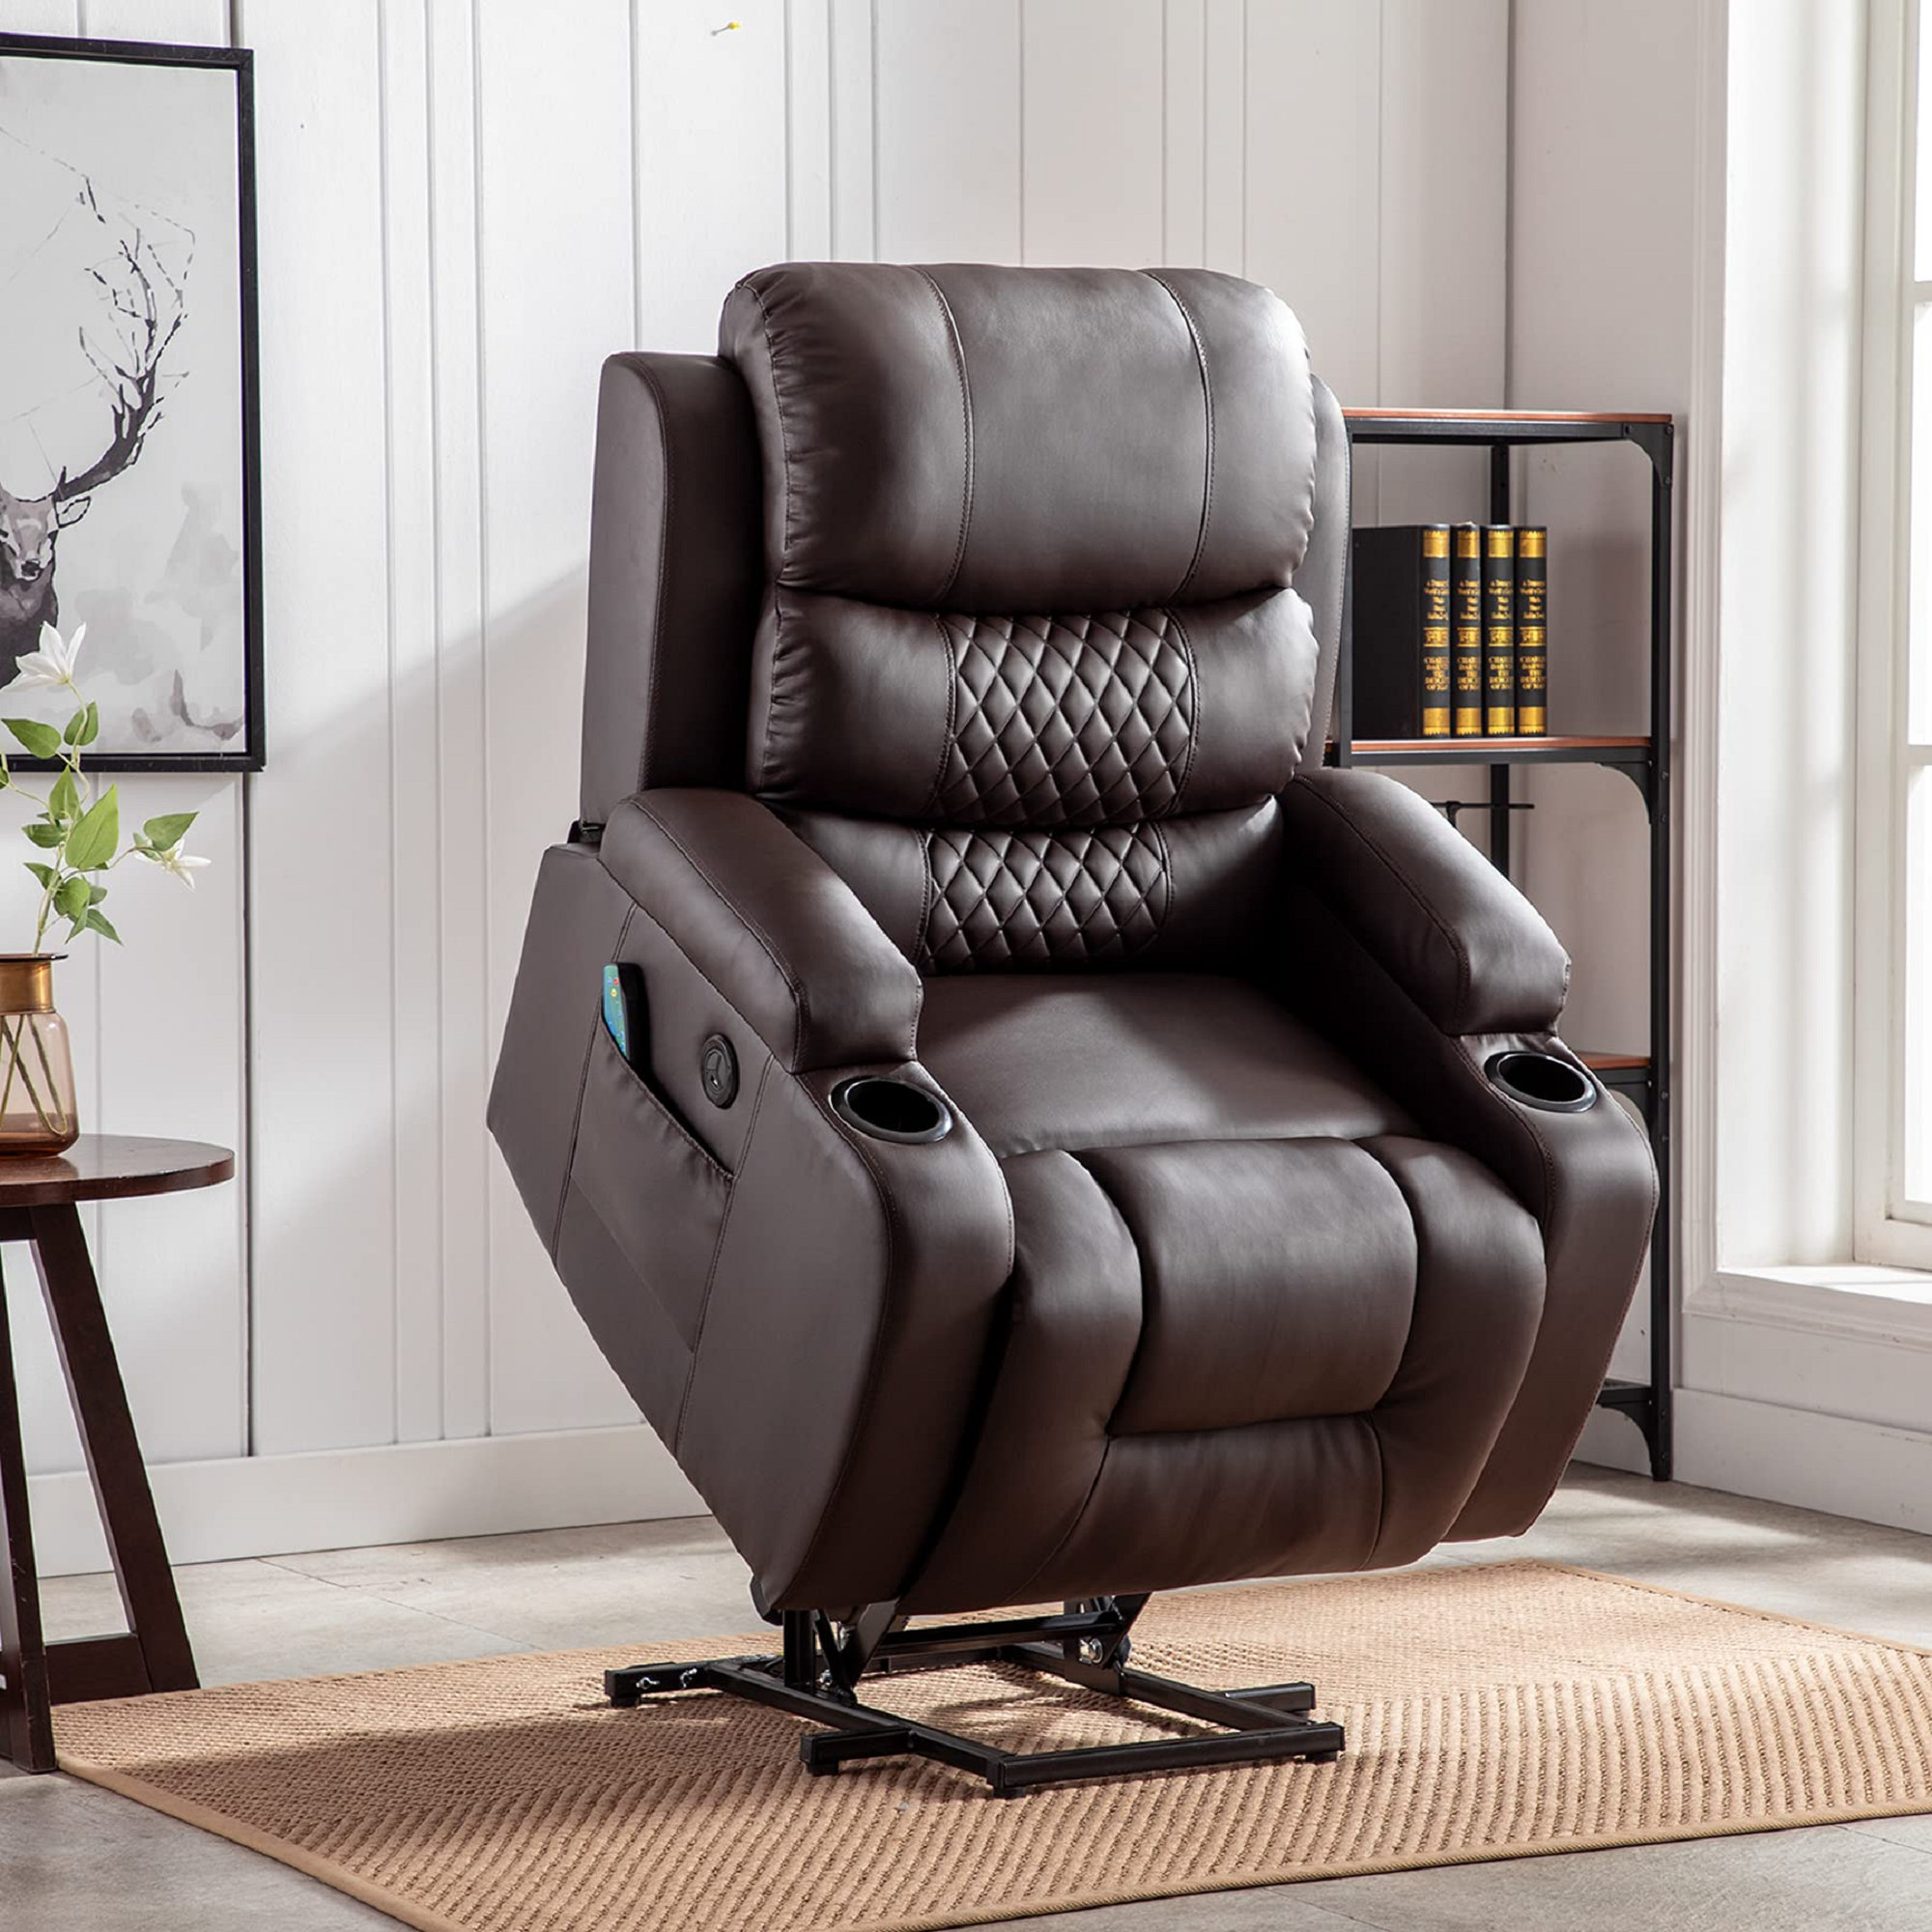 Remote Control Recliners with Lumbar Support Lay Flat Recliner for Seniors  350LB Lift Chairs